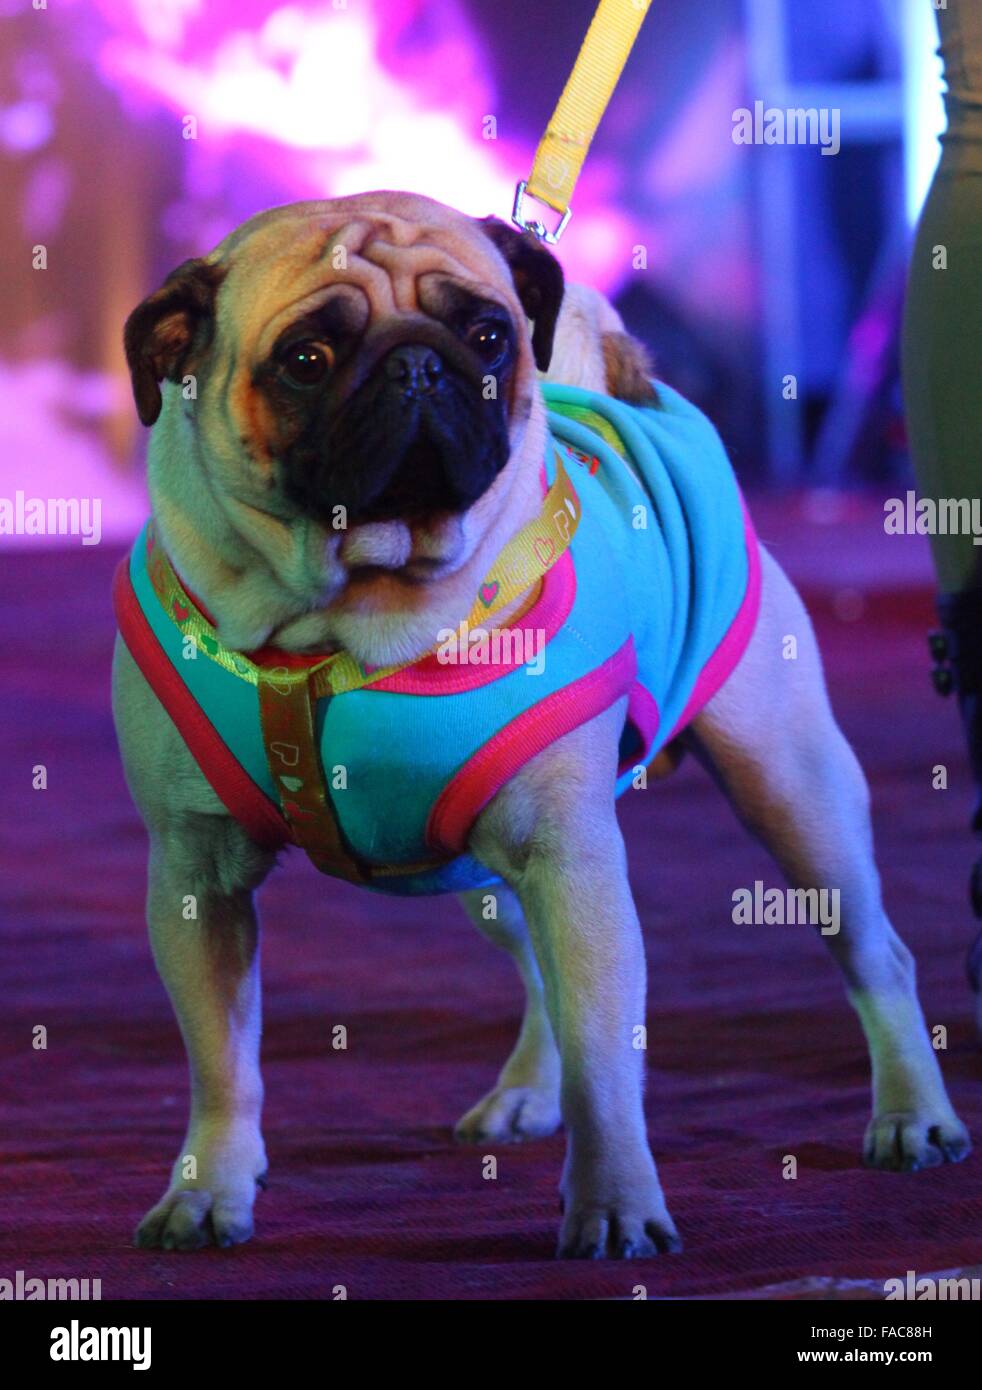 Kathmandu, Nepal. 26th Dec, 2015. A dog walks the runway during a dog fashion show called 'Dog on the Ramp' in Kathmandu, Nepal, Dec. 26, 2015. The fashion show was organized for the first time in Nepal to showcase various breeds of dogs. Credit:  Sunil Sharma/Xinhua/Alamy Live News Stock Photo